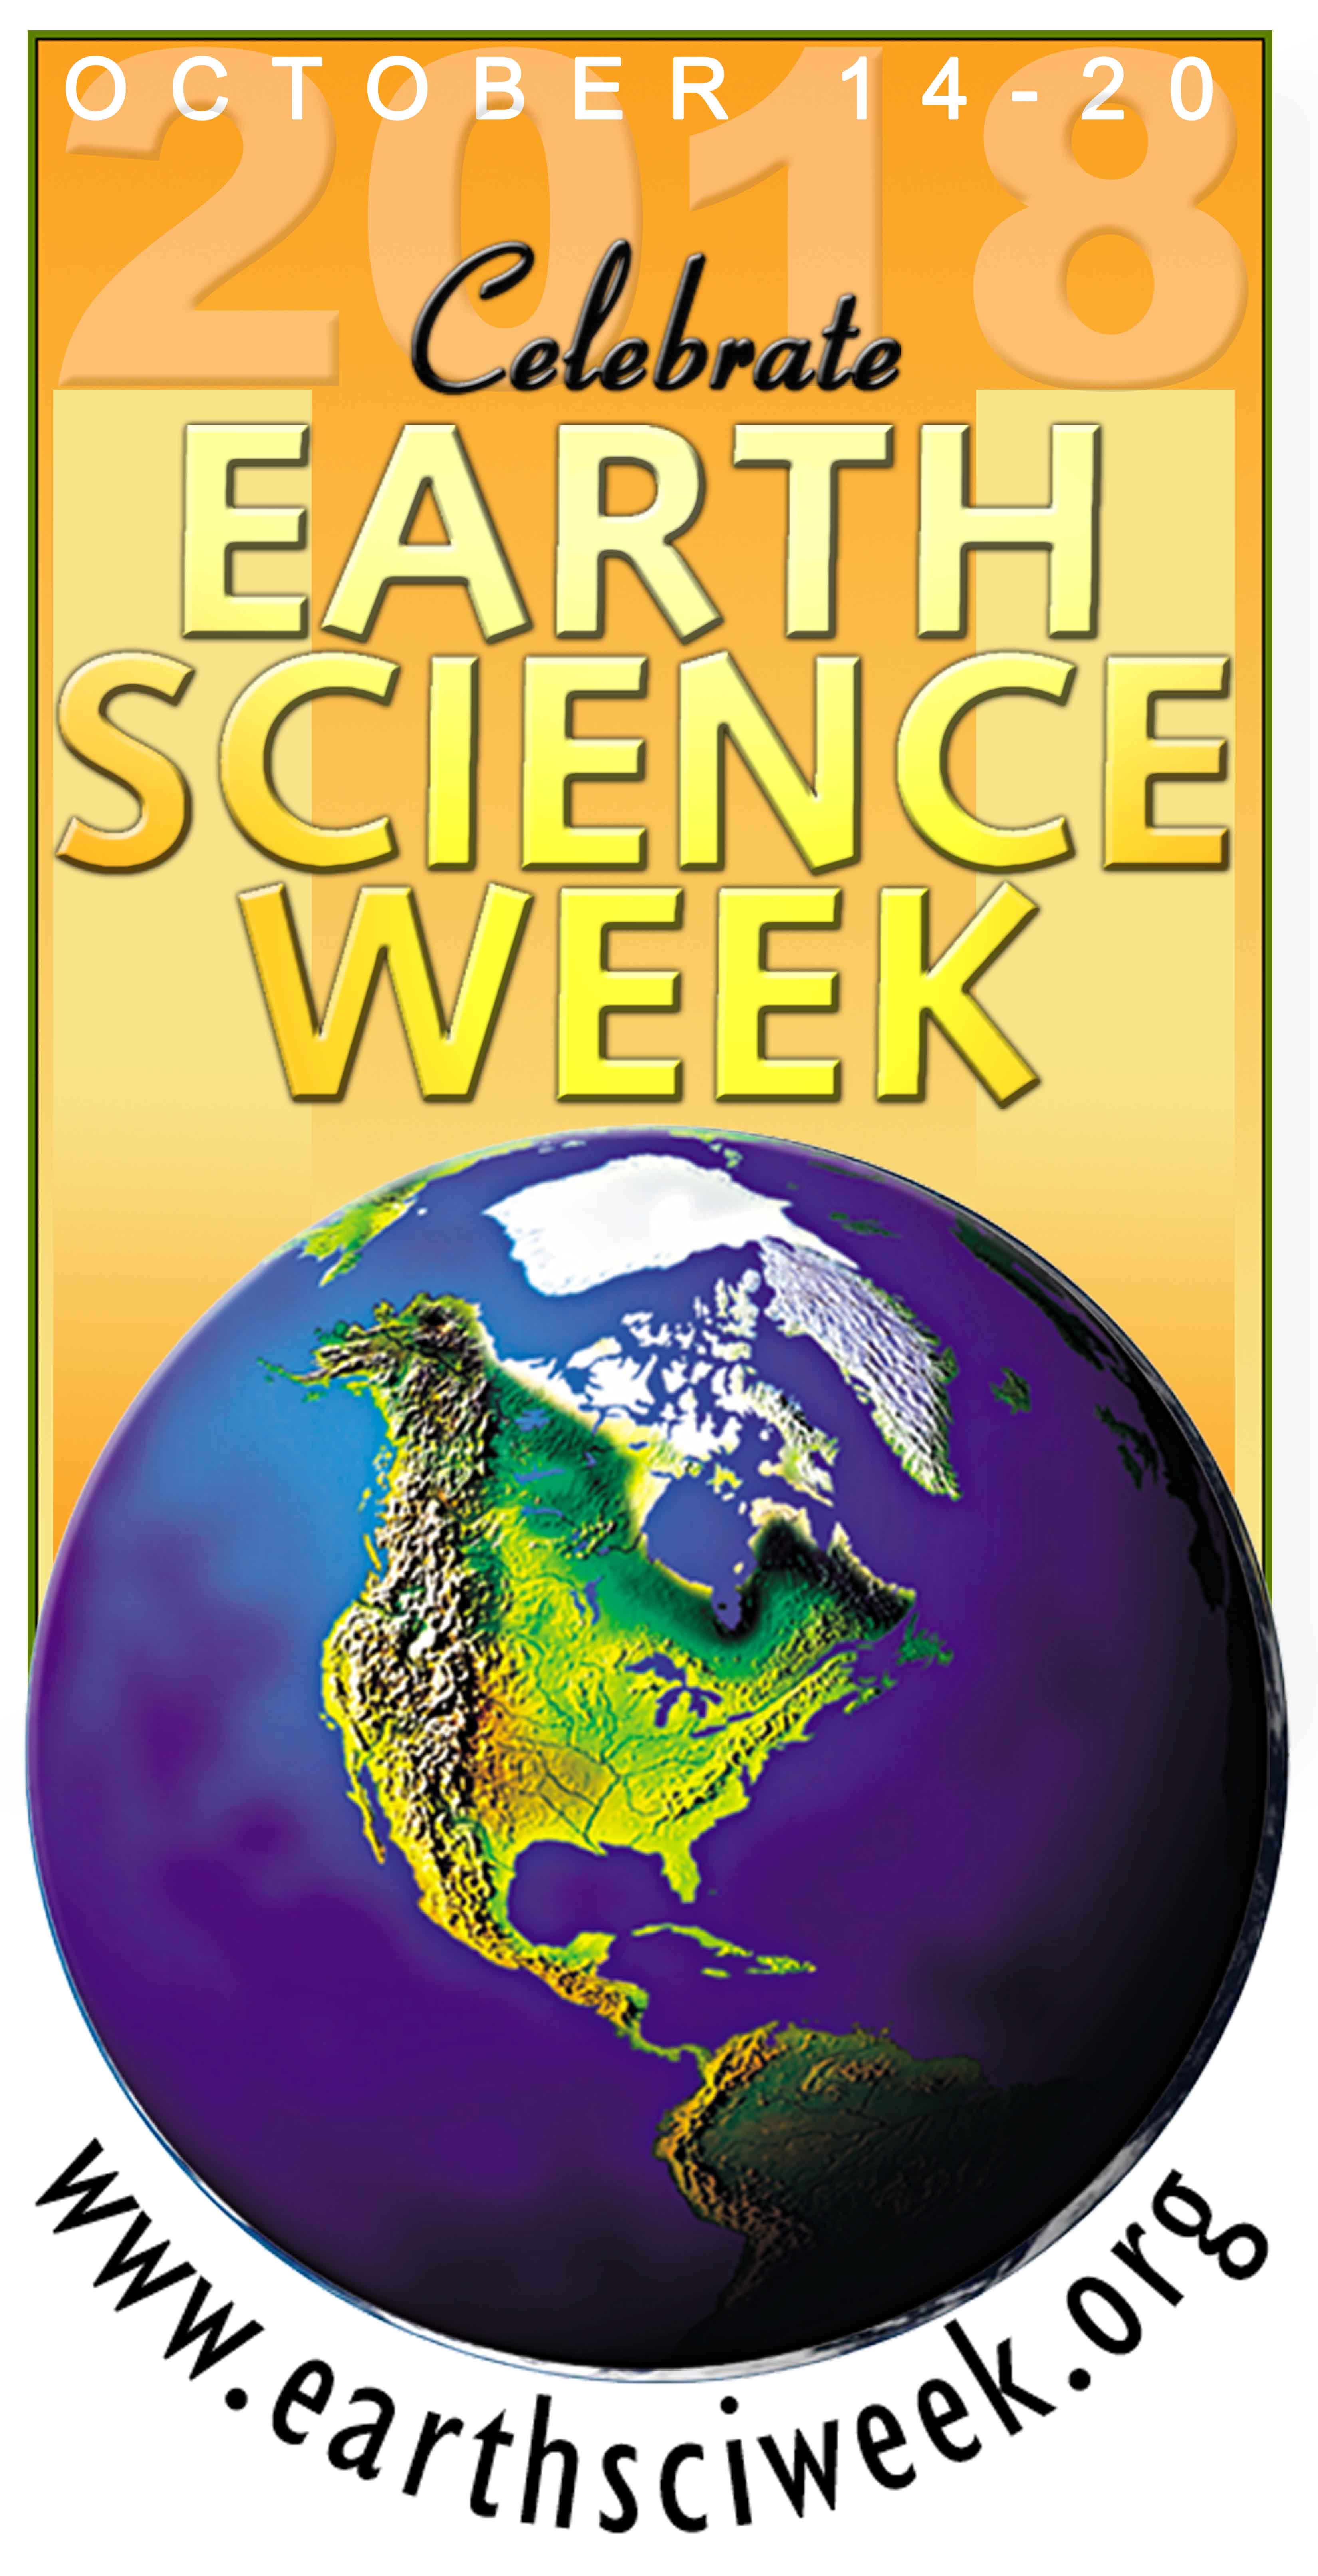 Science Globe Logo - Downloadable Image and Logos. Earth Science Week